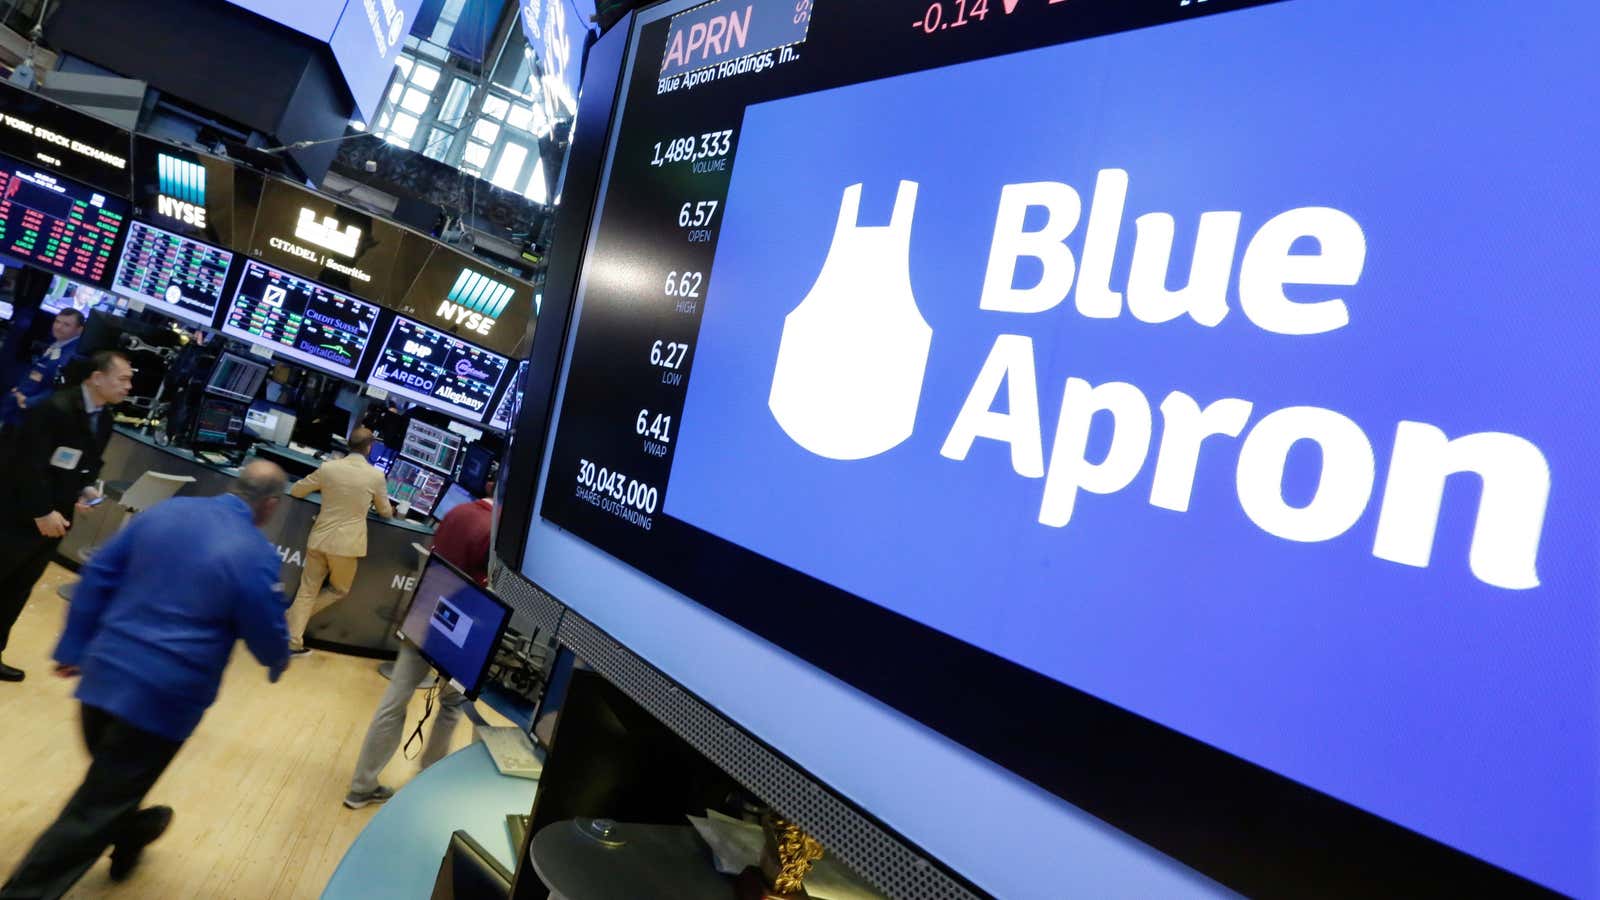 The fact that Blue Apron had acquired so many customers so quickly should have been a huge competitive advantage.